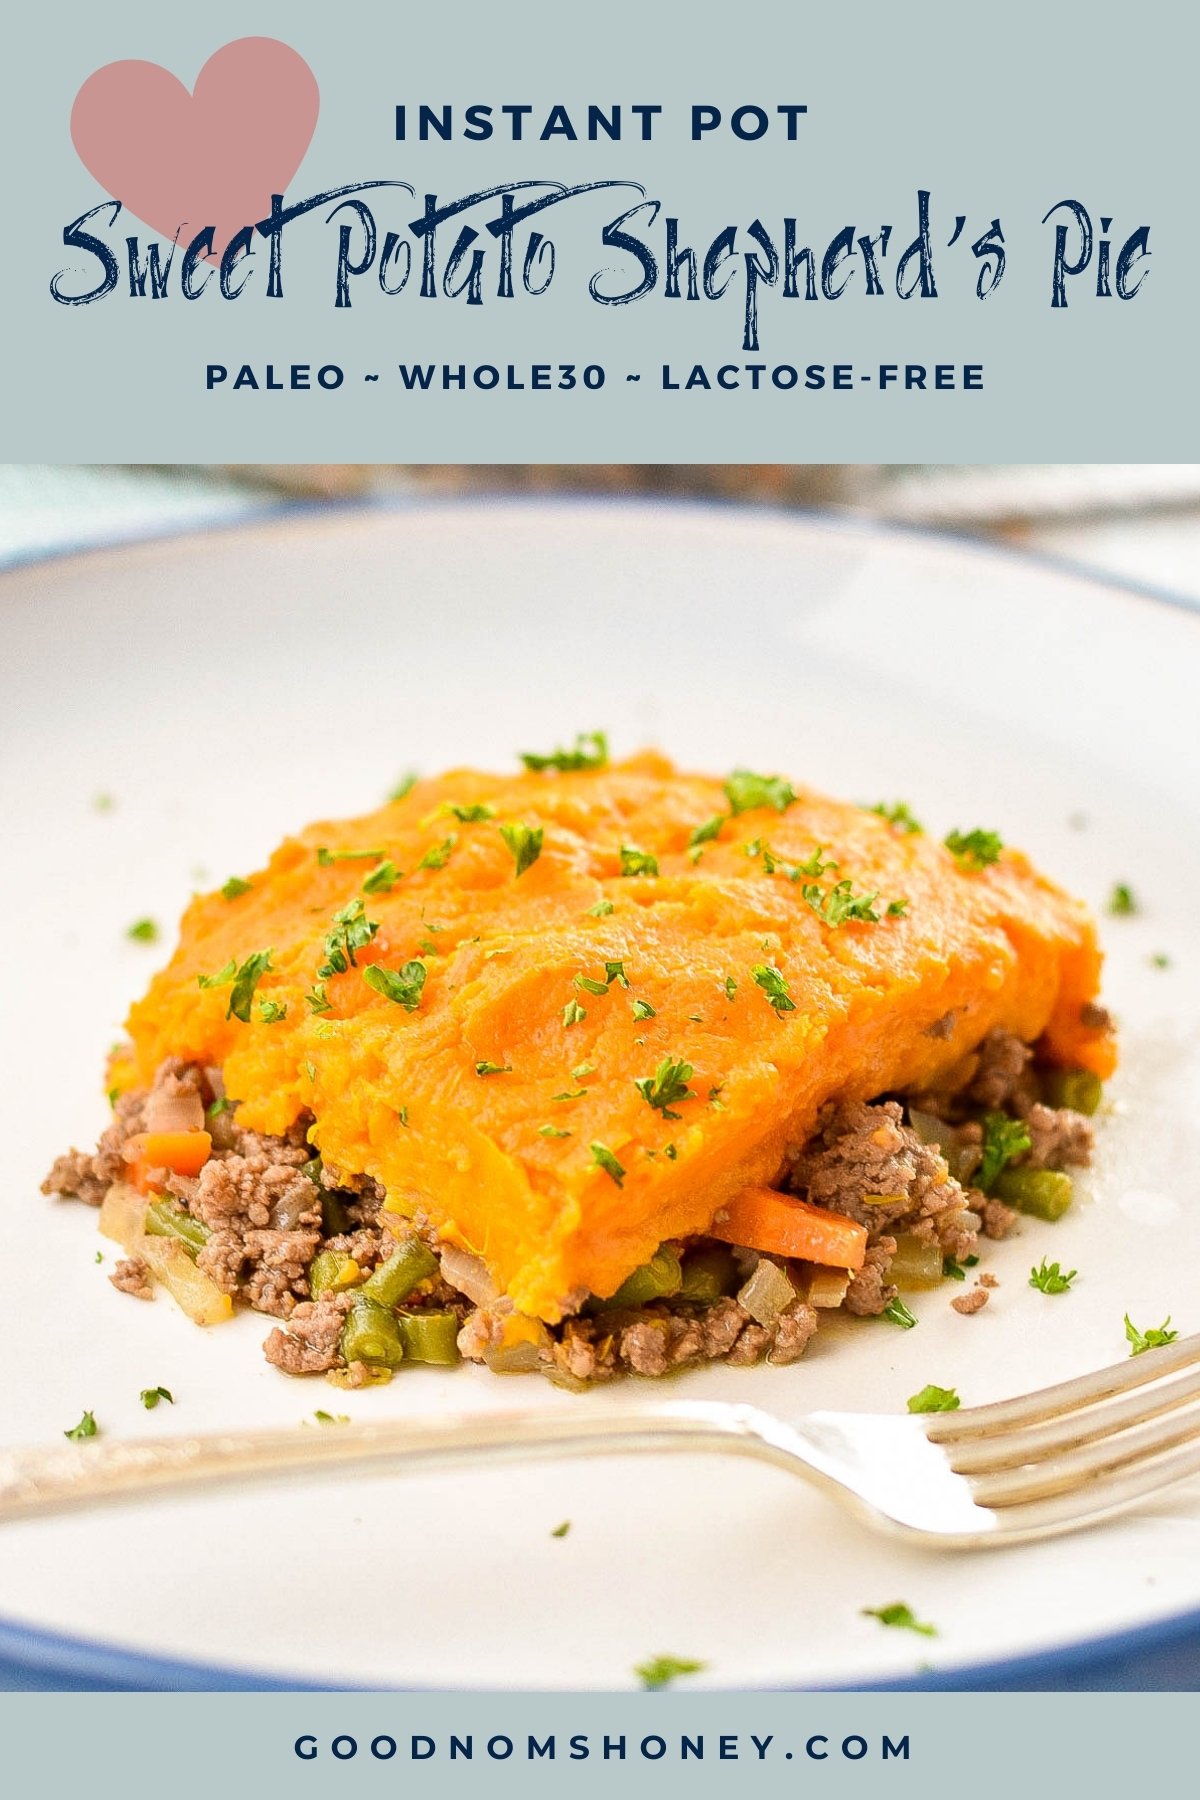 Pinterest image of instant pot sweet potato shepherd's pie paleo whole30 lactose-free at the top and goodnomshoney.com at the bottom